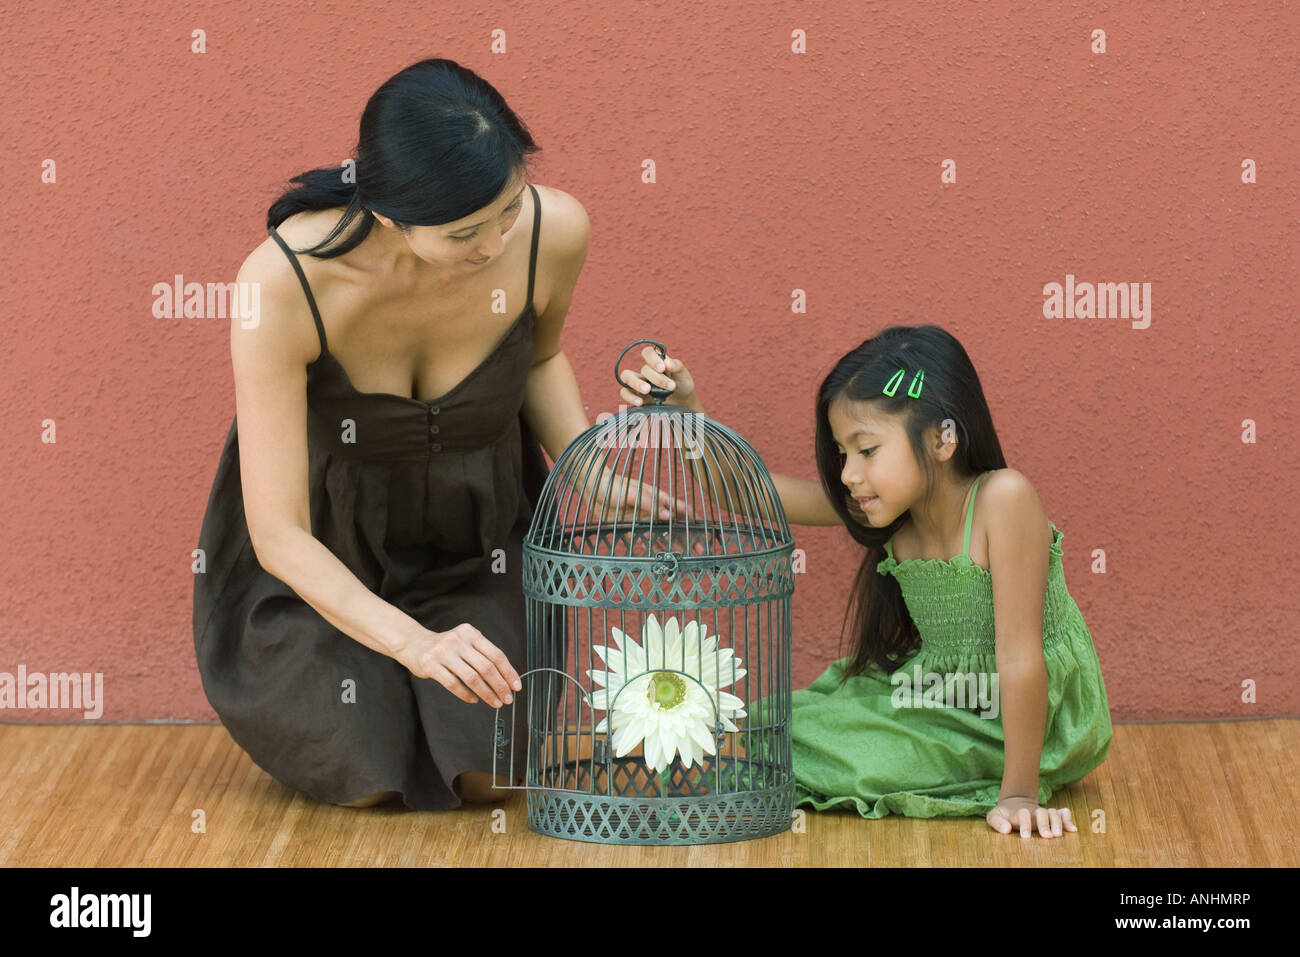 Woman and girl with birdcage containing flower, woman opening door Stock Photo